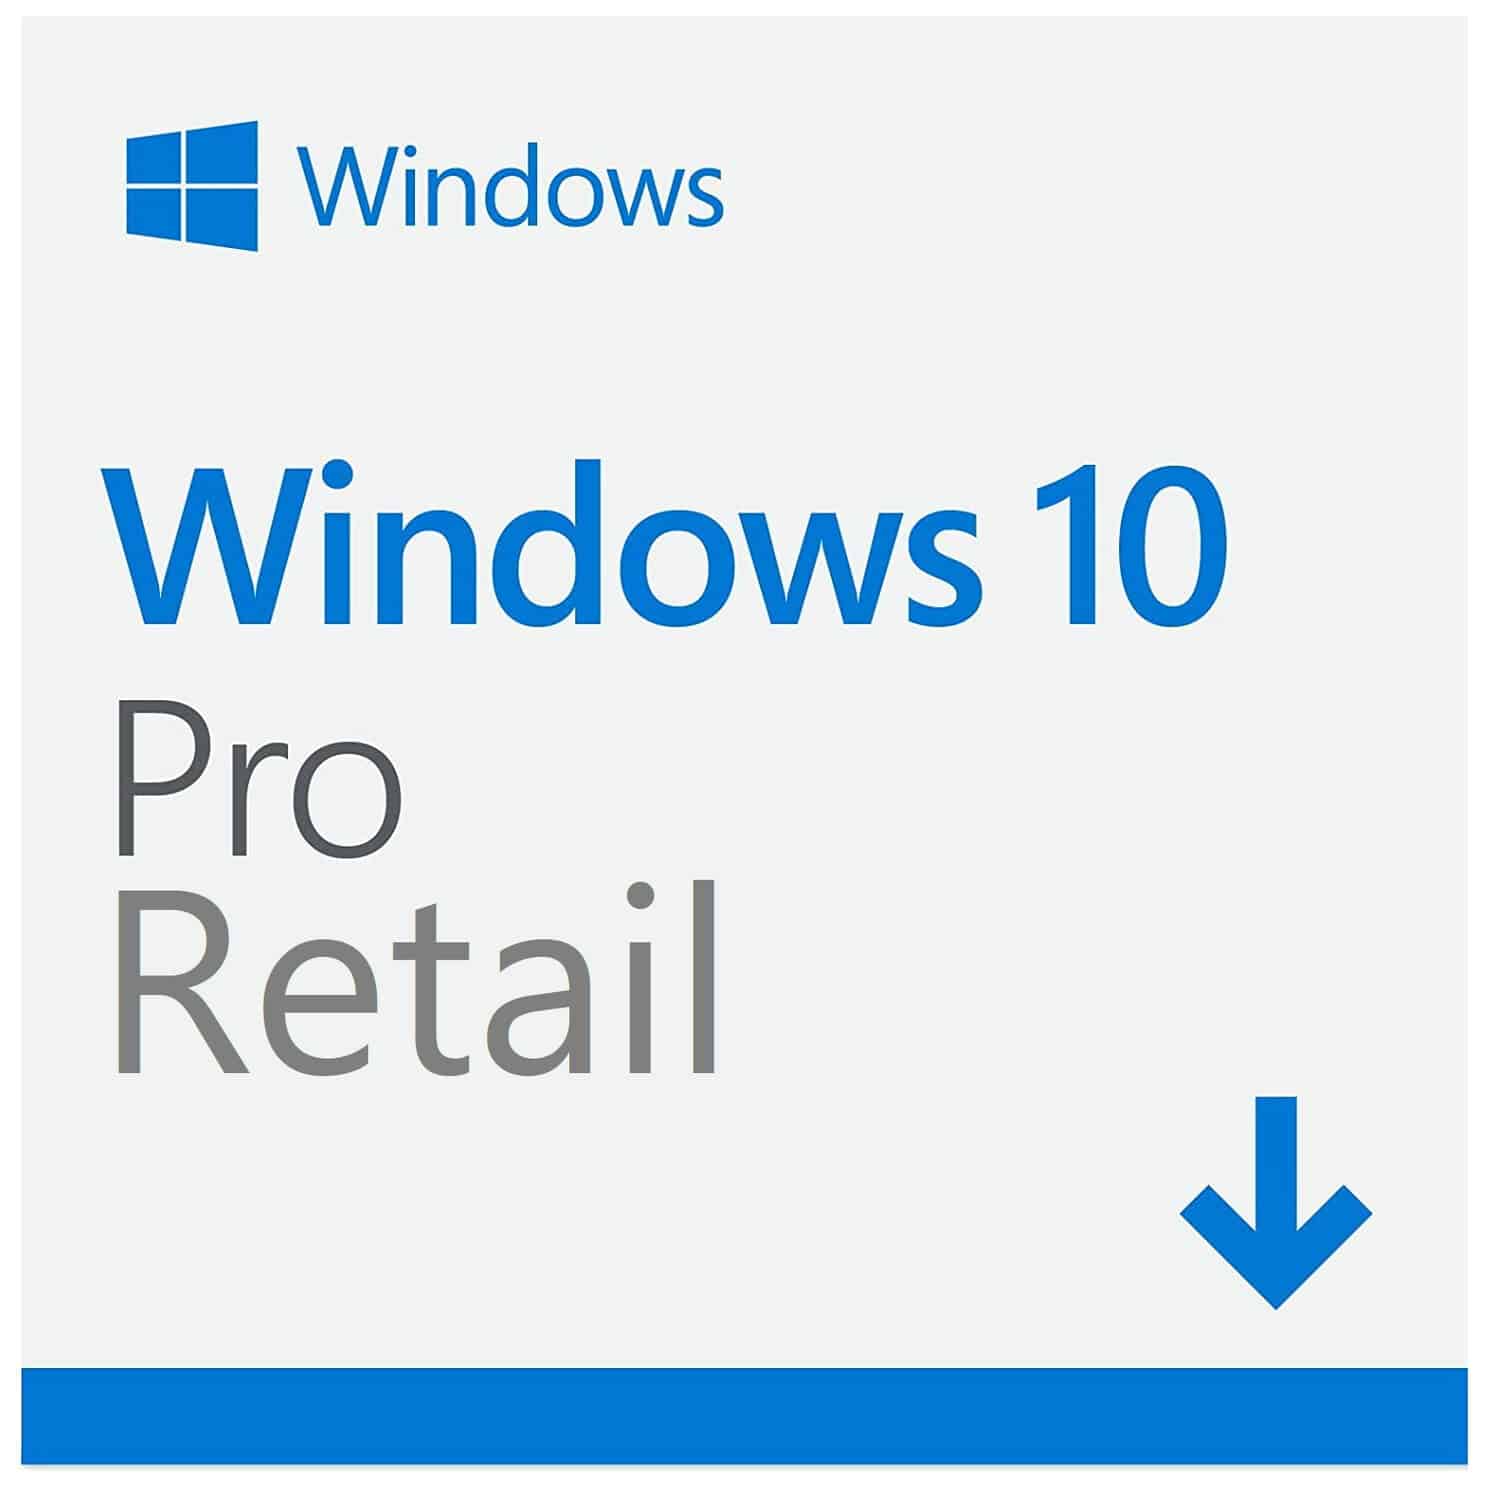 windows 10 pro retail download requirements